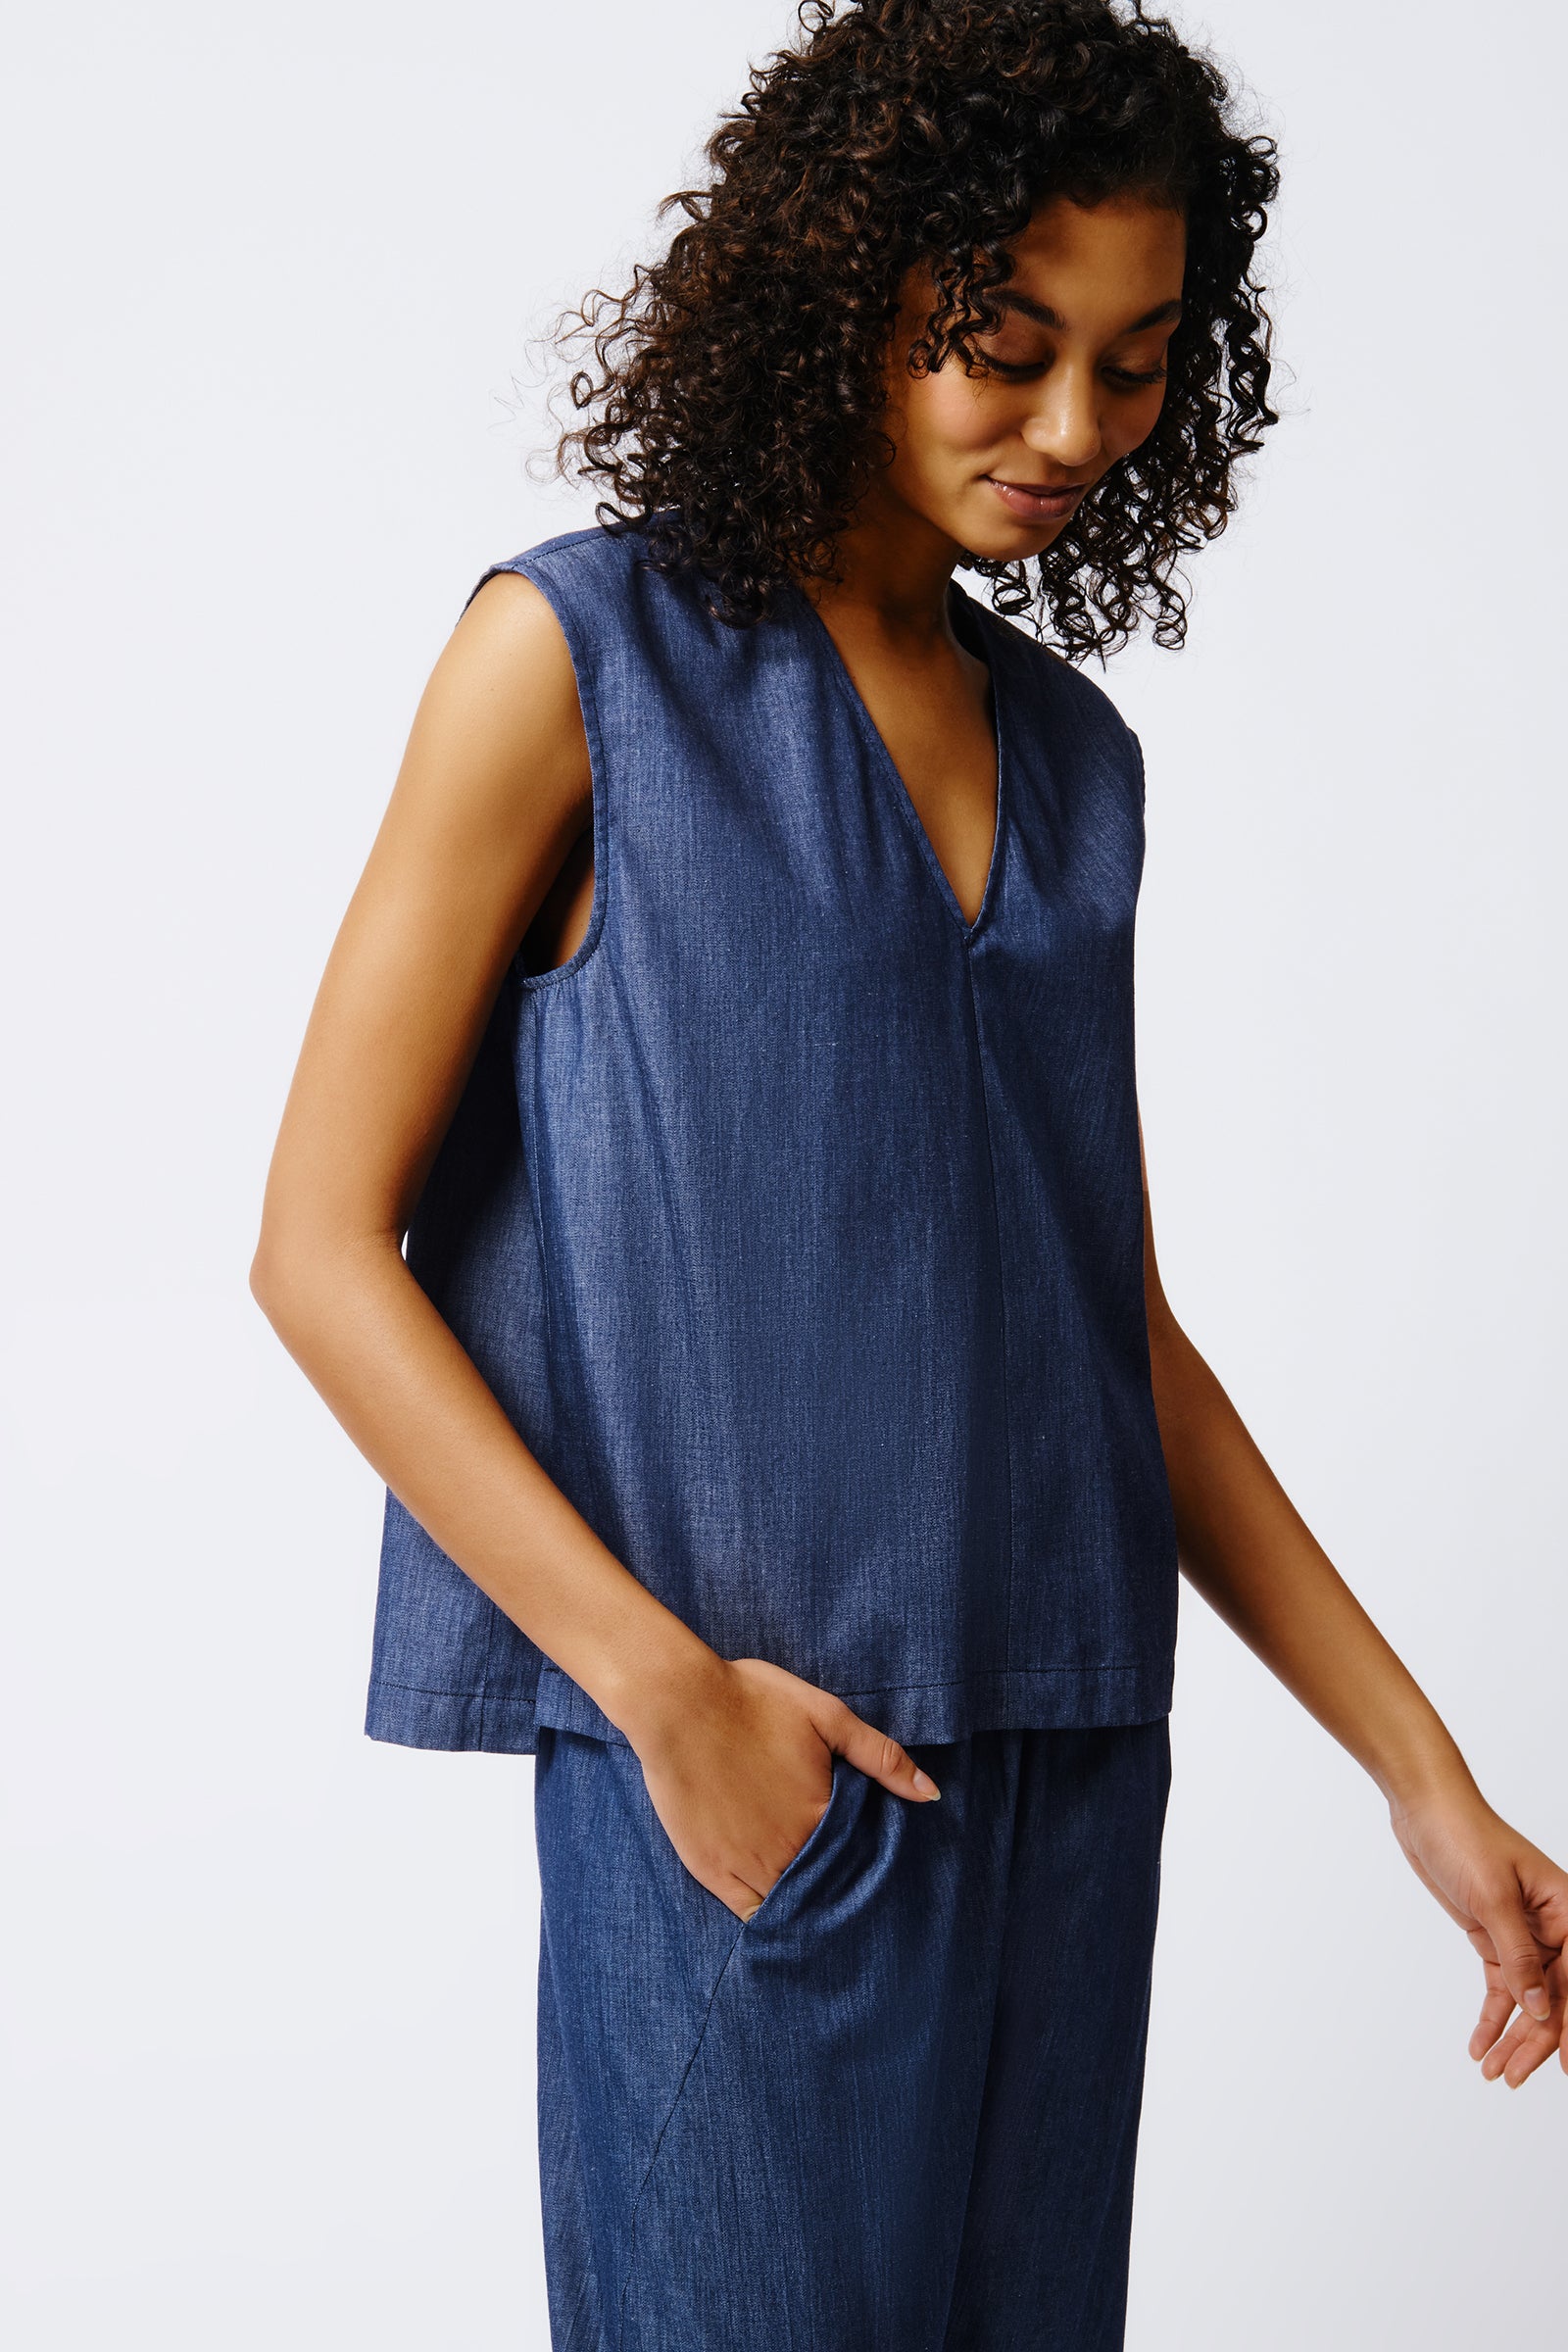 Kal Rieman Ava V Neck Shell in Classic Indigo on Model Side View Crop 2